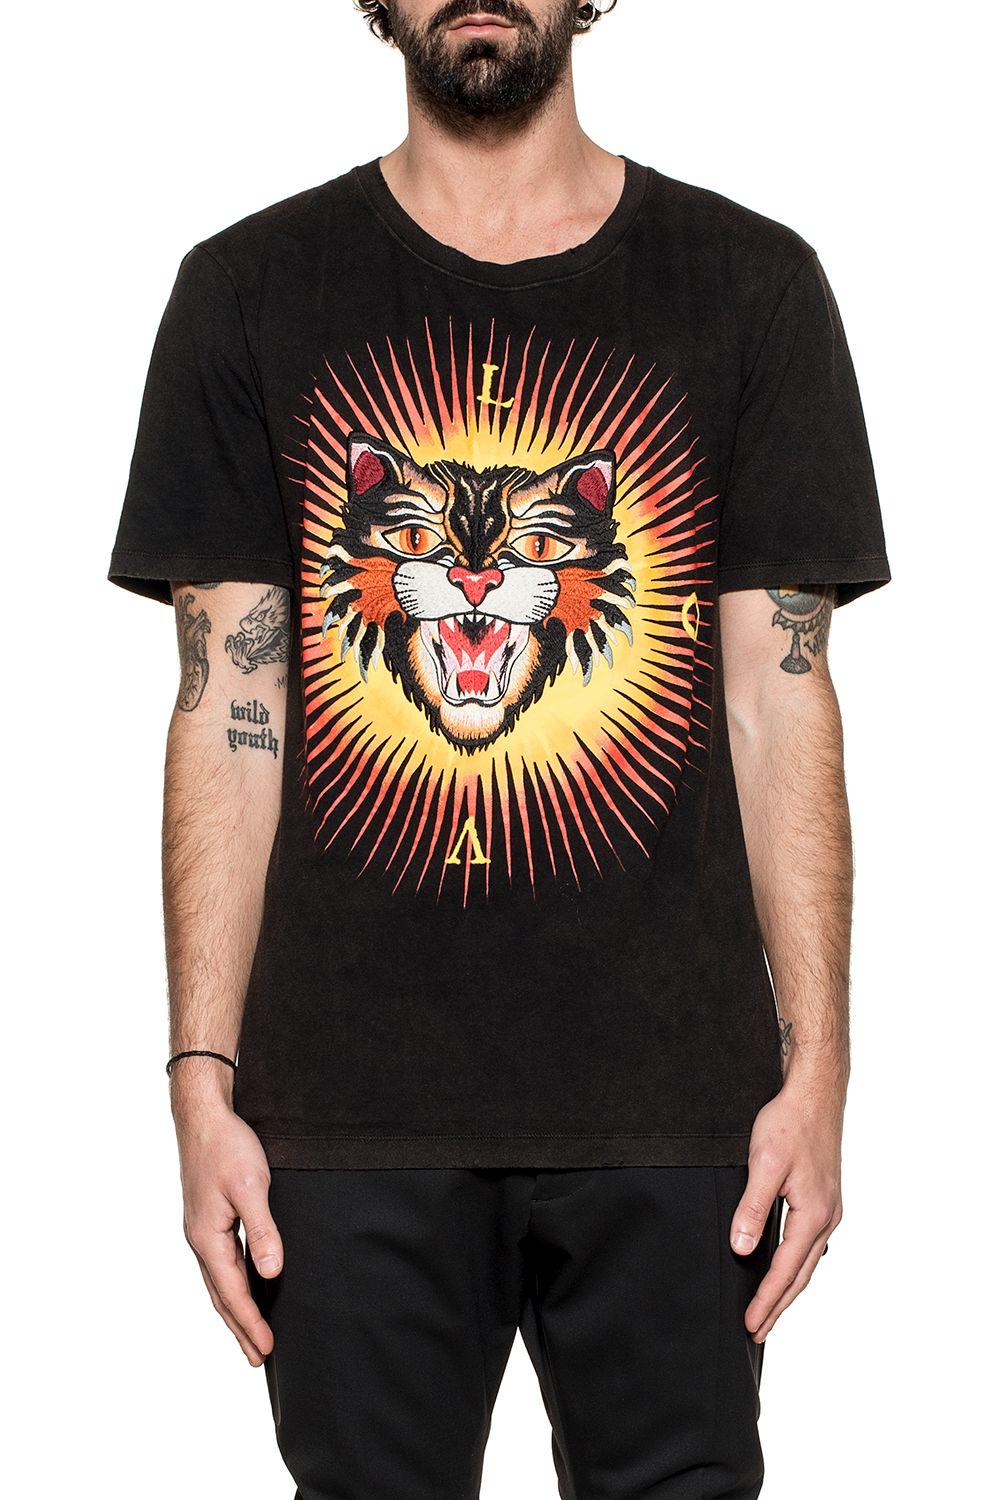 gucci angry cat t shirt